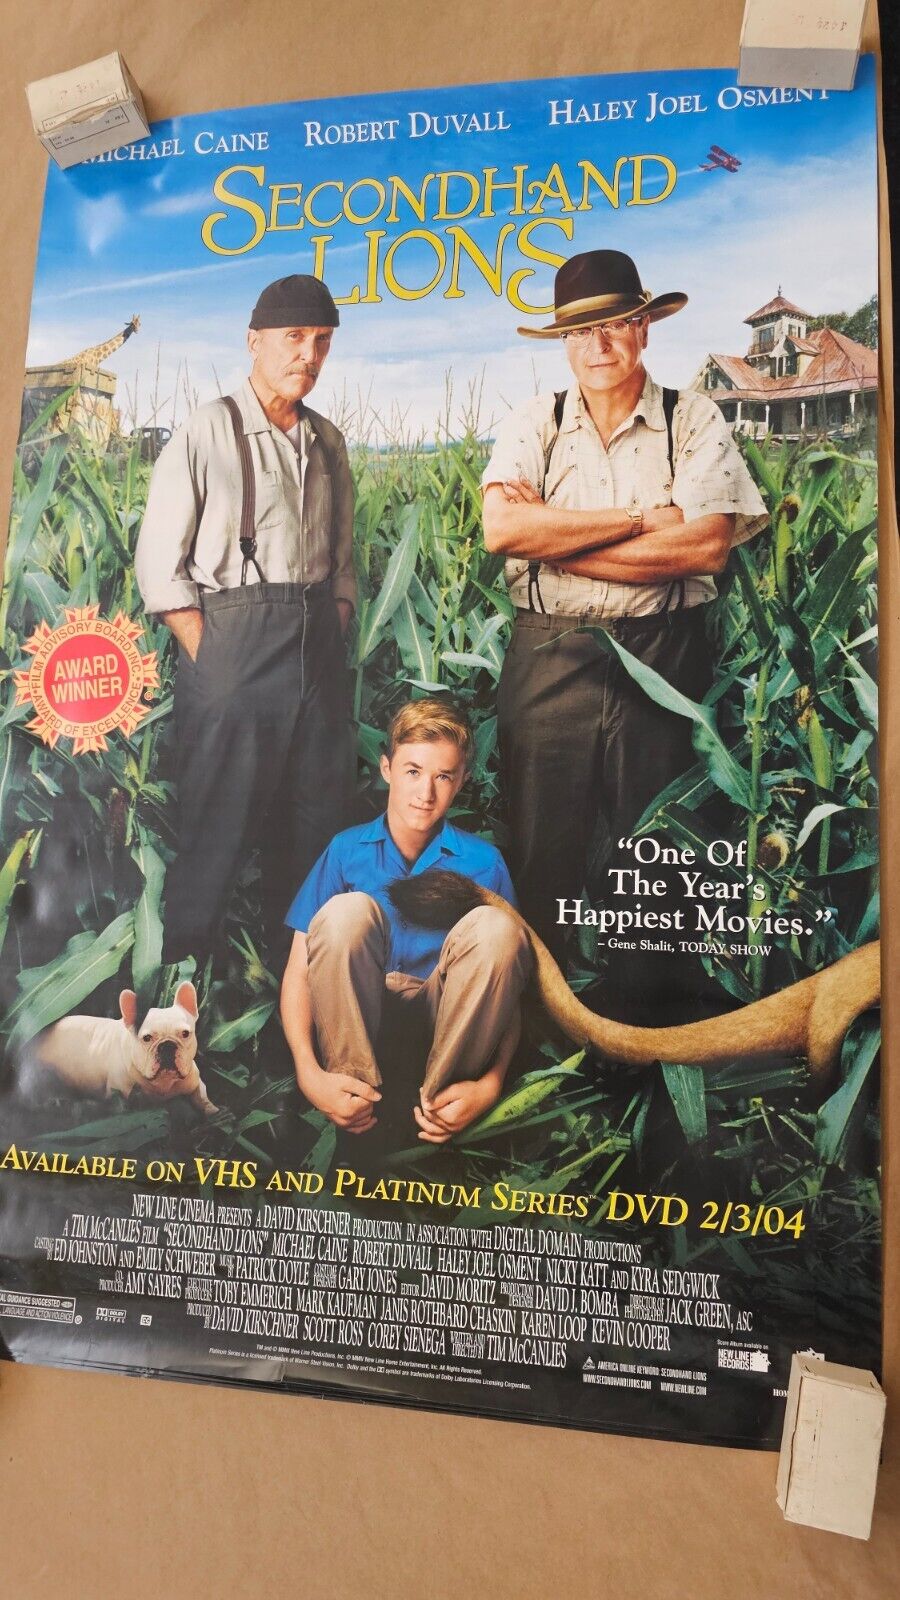 Michael Caine And Robert Duvall in SecondHand Lions DVD promotional poster